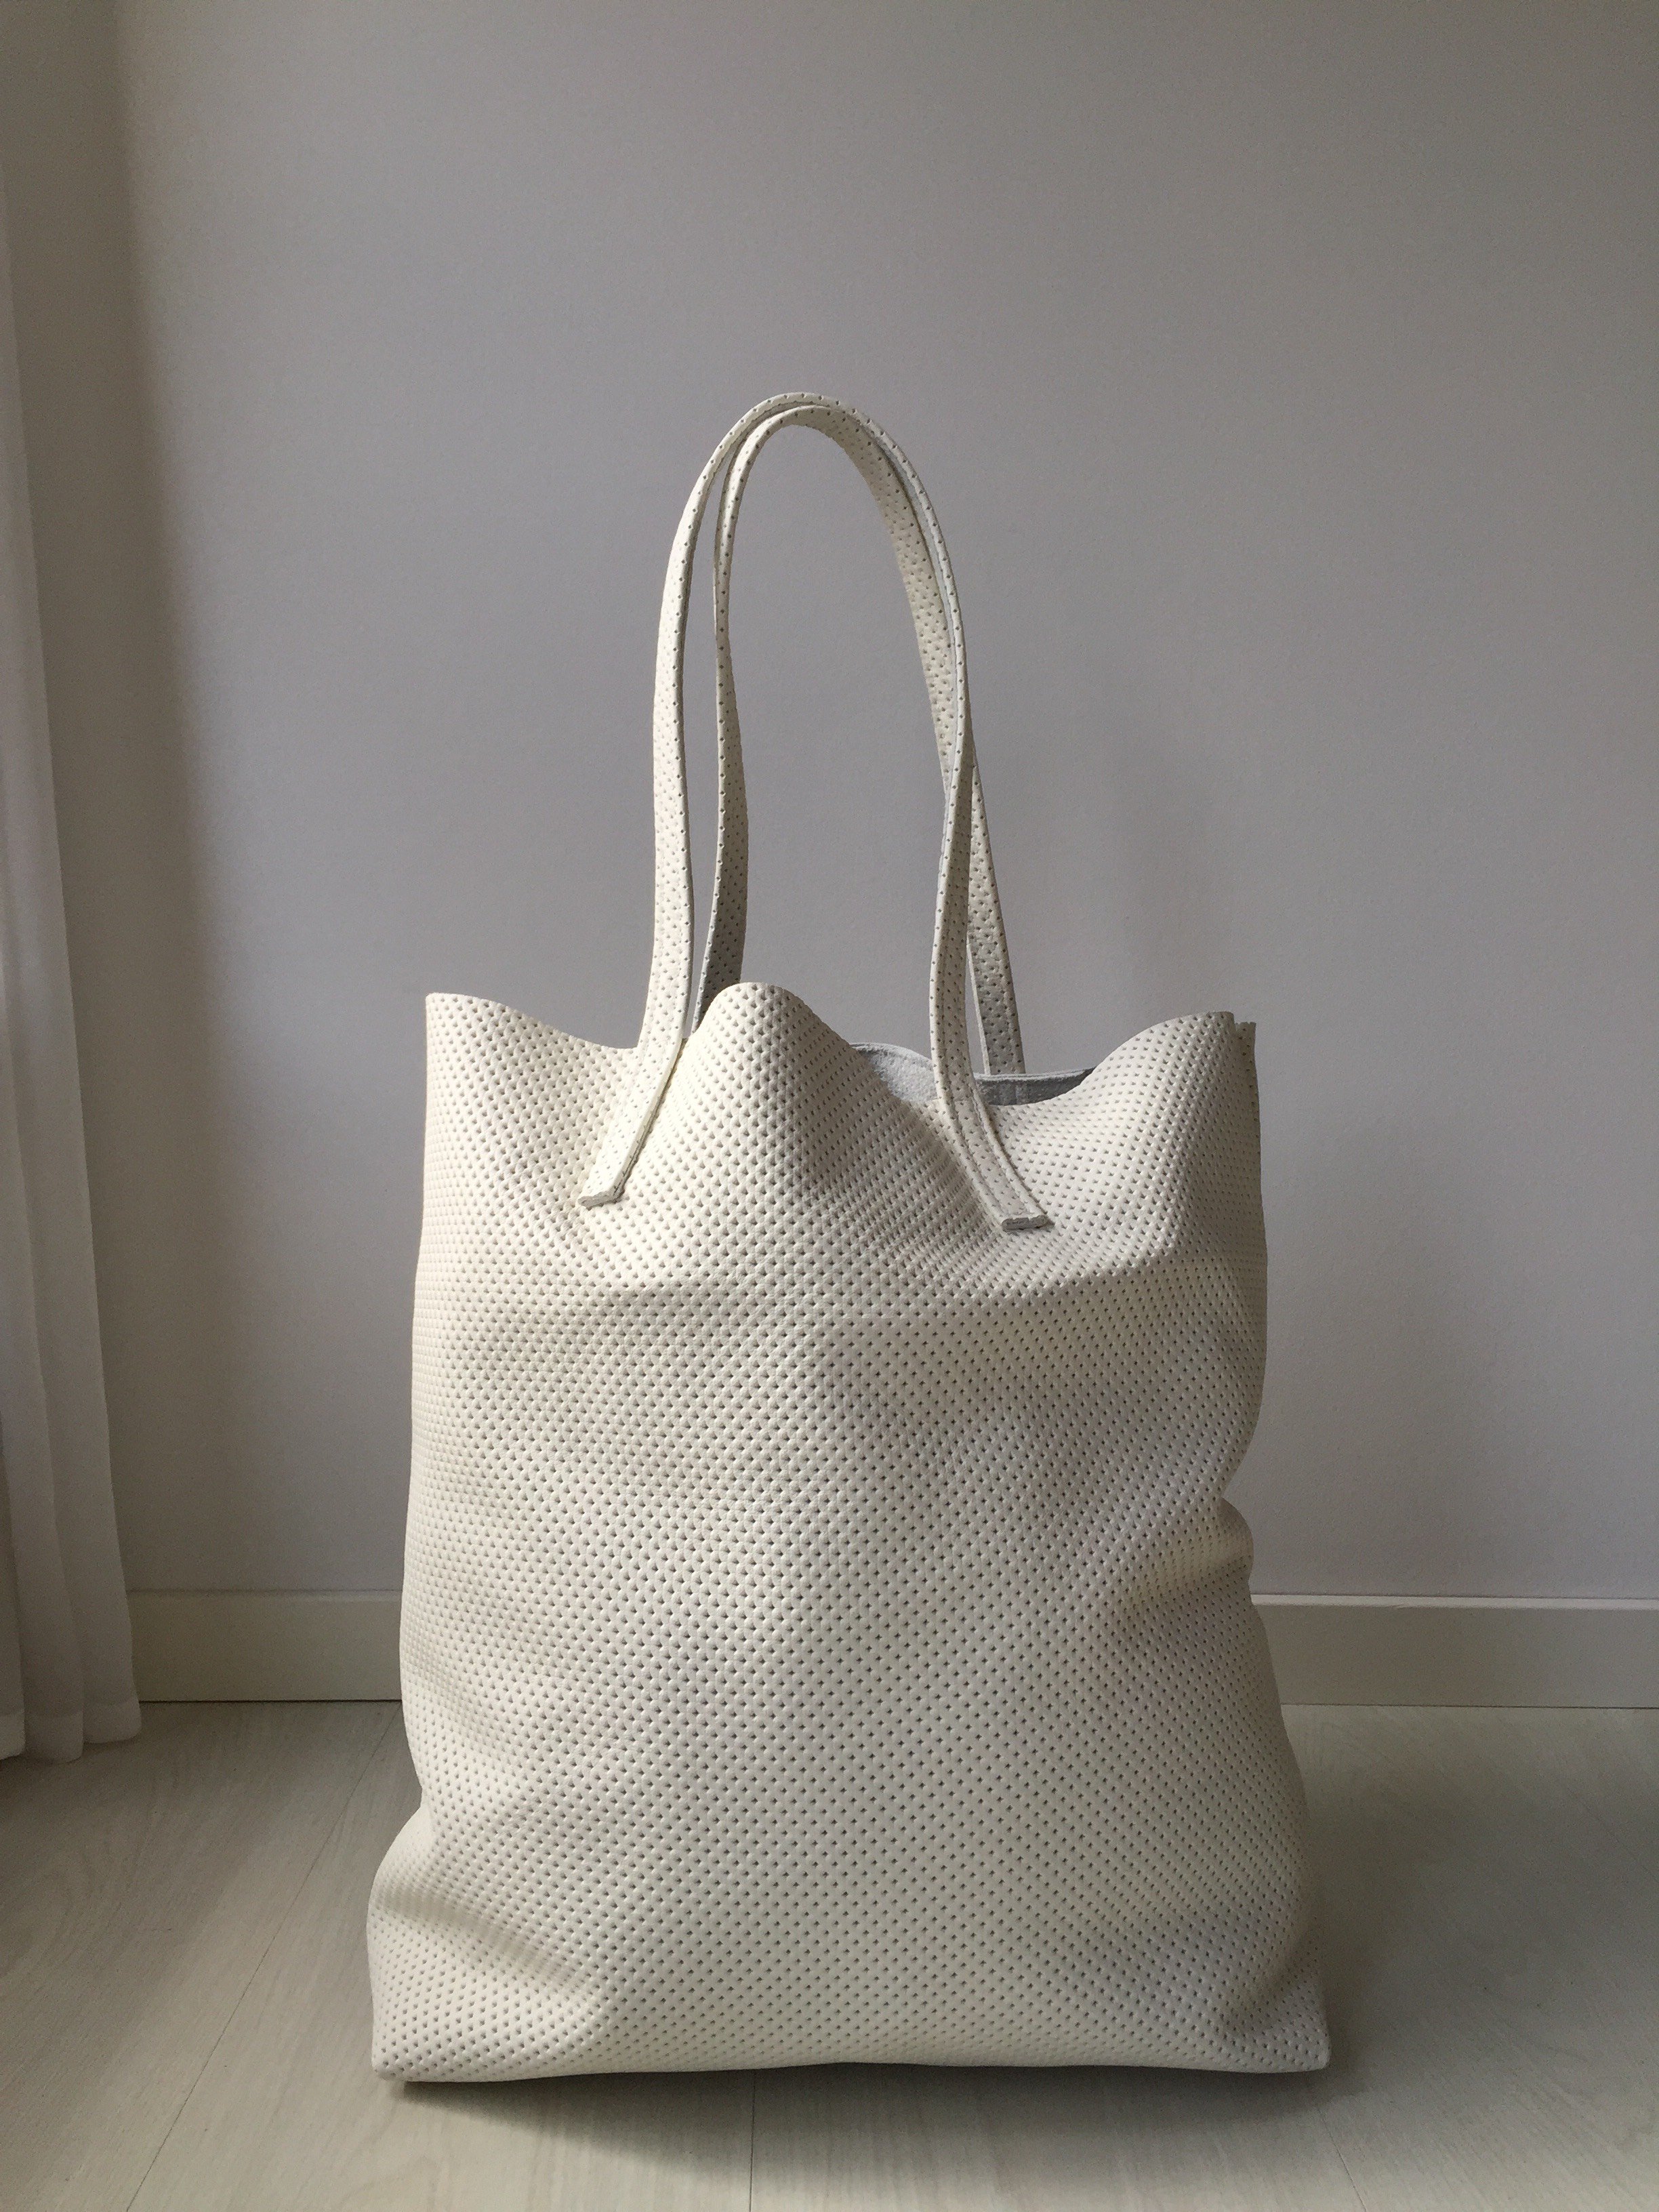 Raw Leather Tote Bag - White perforated